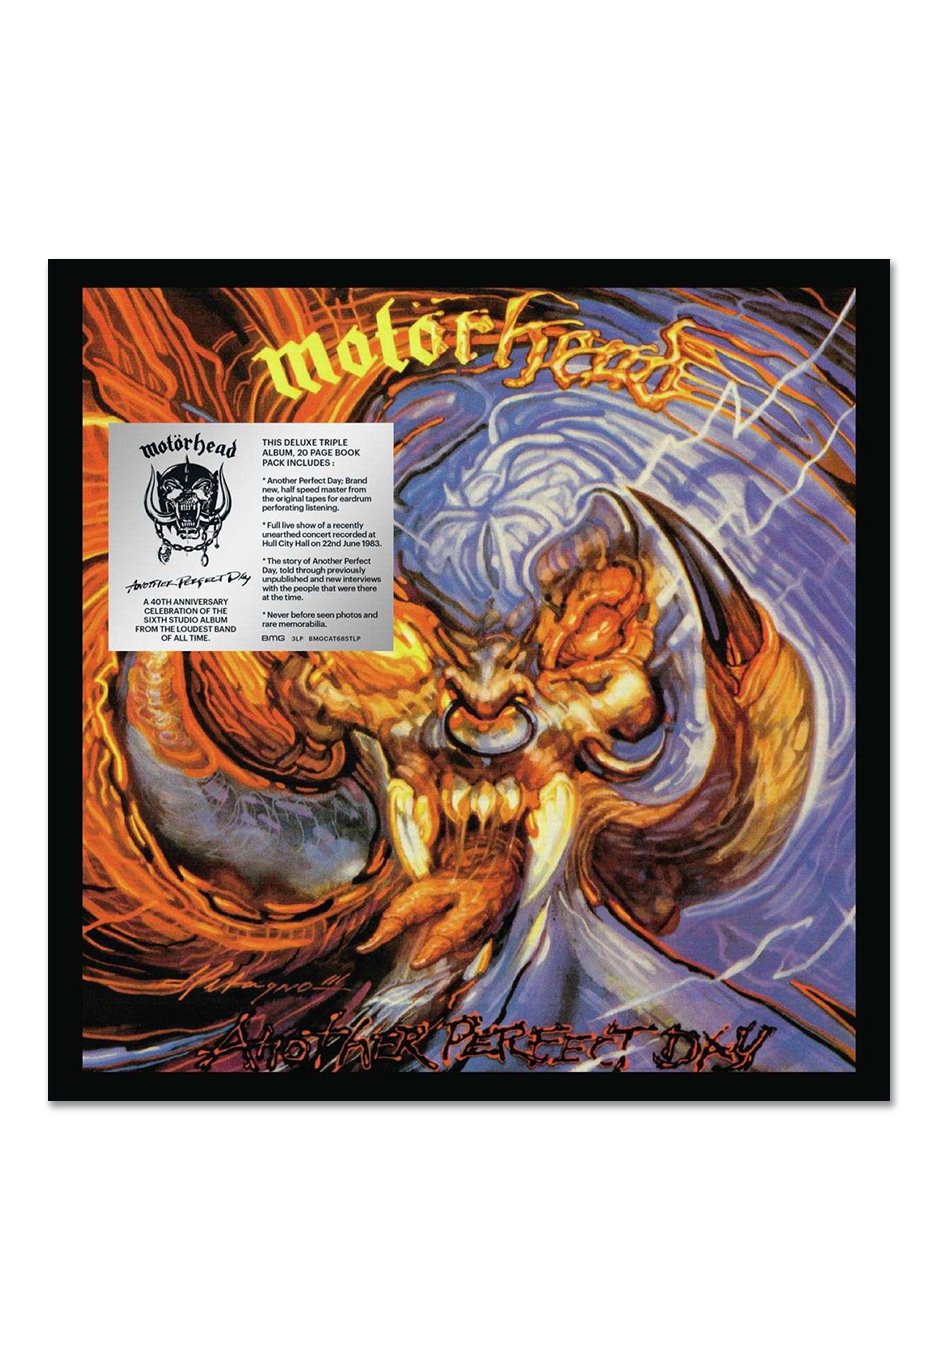 Motörhead - Another Perfect Day 40th Anniversary - 2 CD